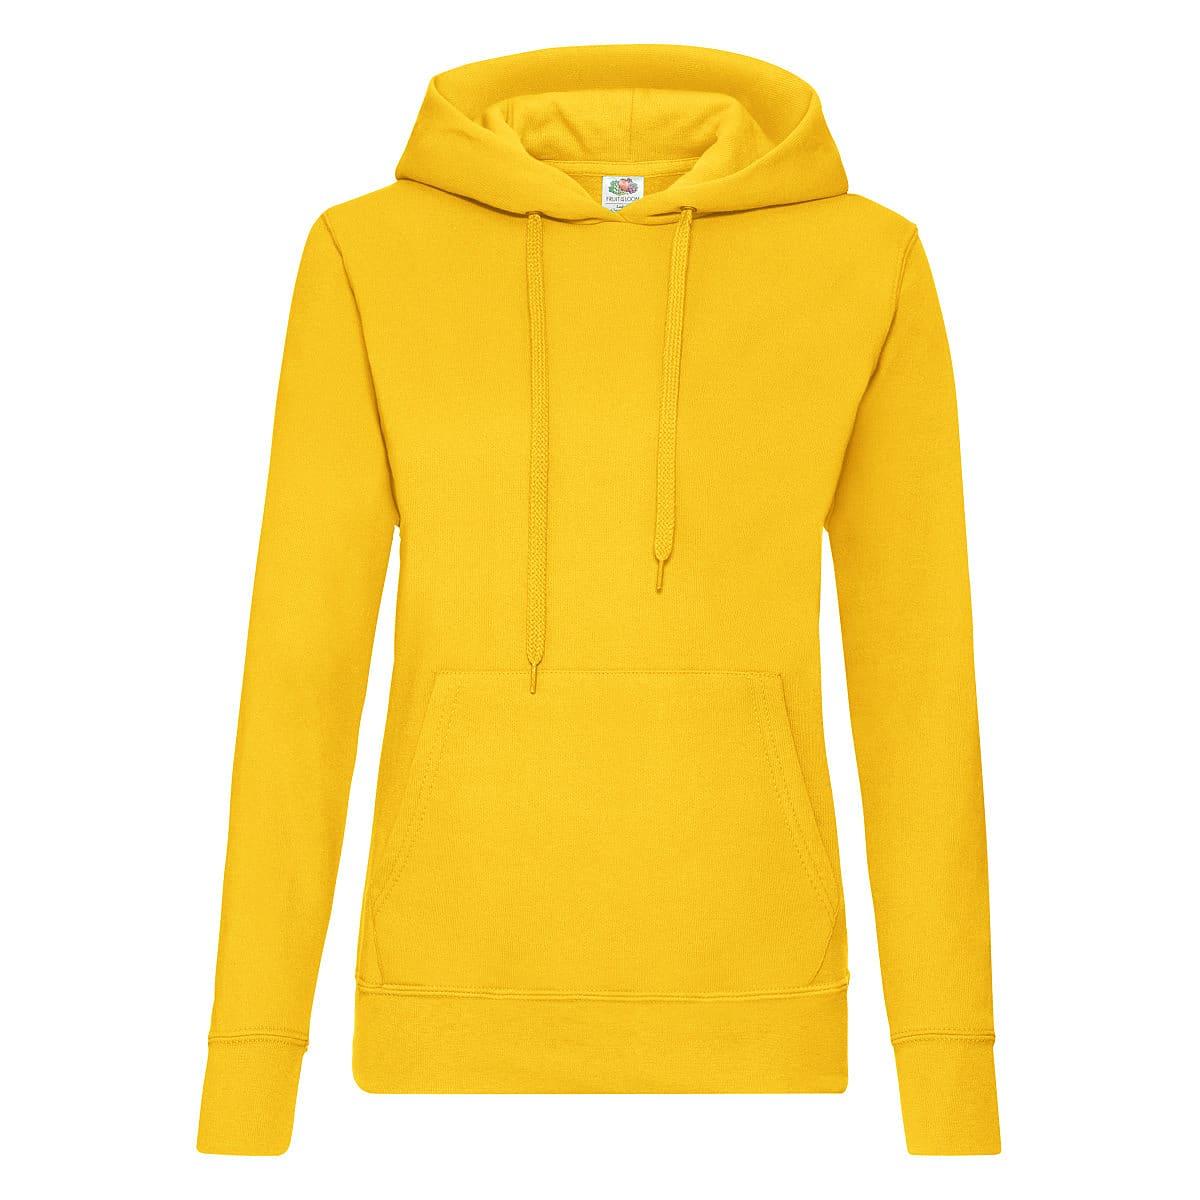 Fruit Of The Loom Lady-Fit Classic Hoodie in Sunflower (Product Code: 62038)